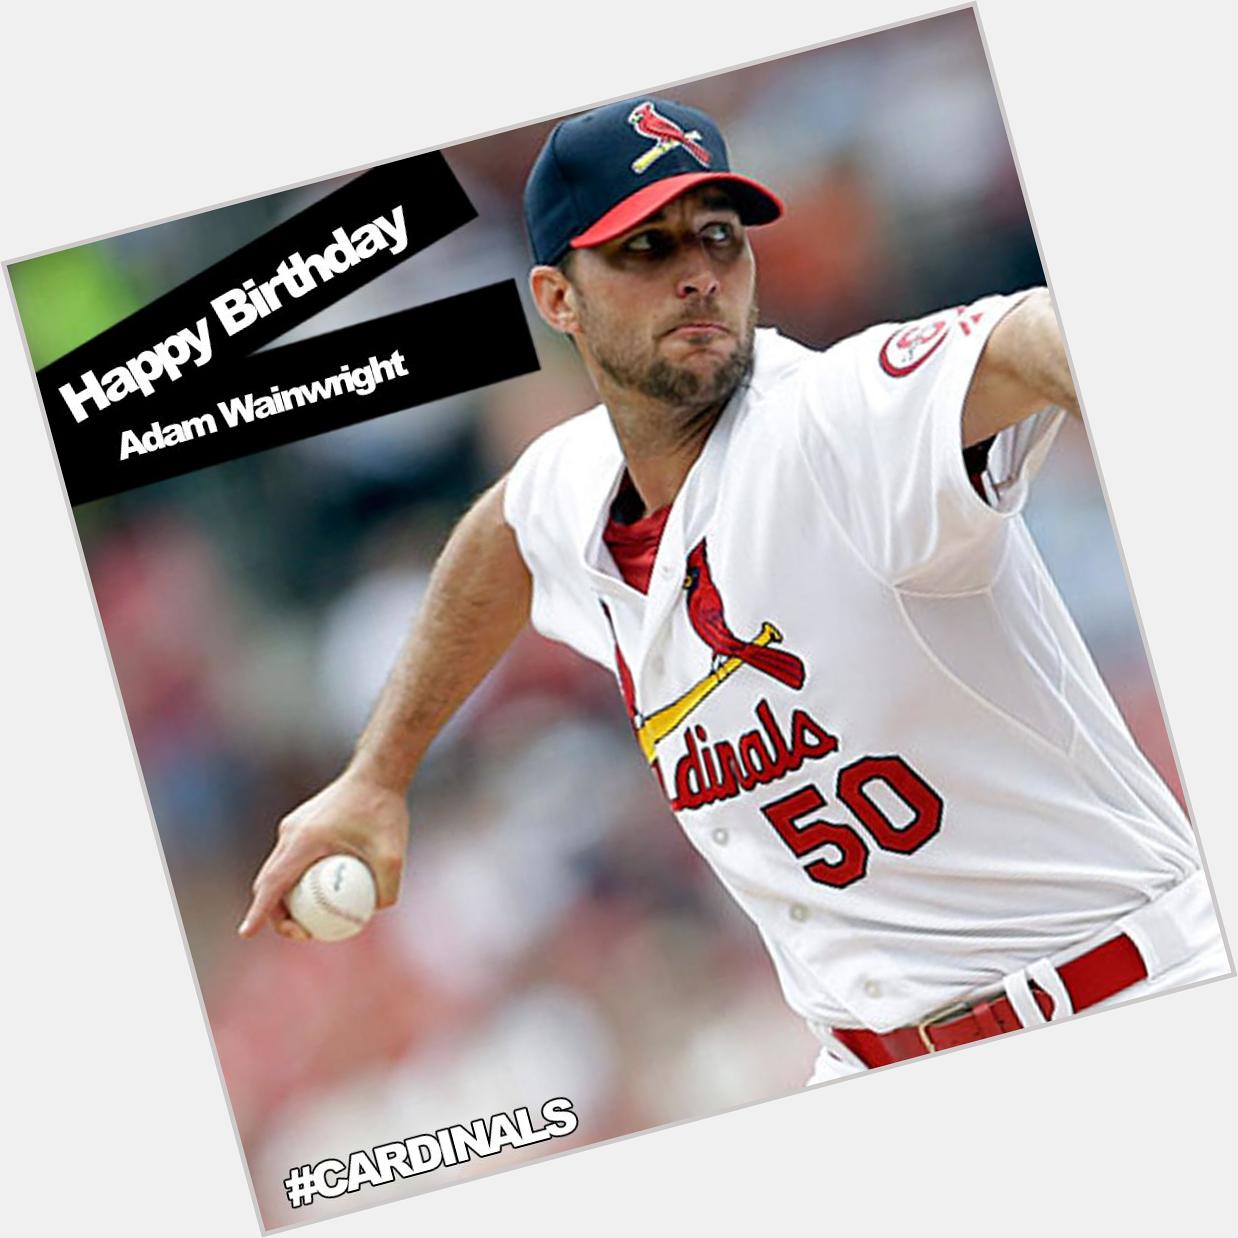 
Happy Birthday Adam Wainwright of the St. Louis Cardinals. The pitcher turns 34 today 